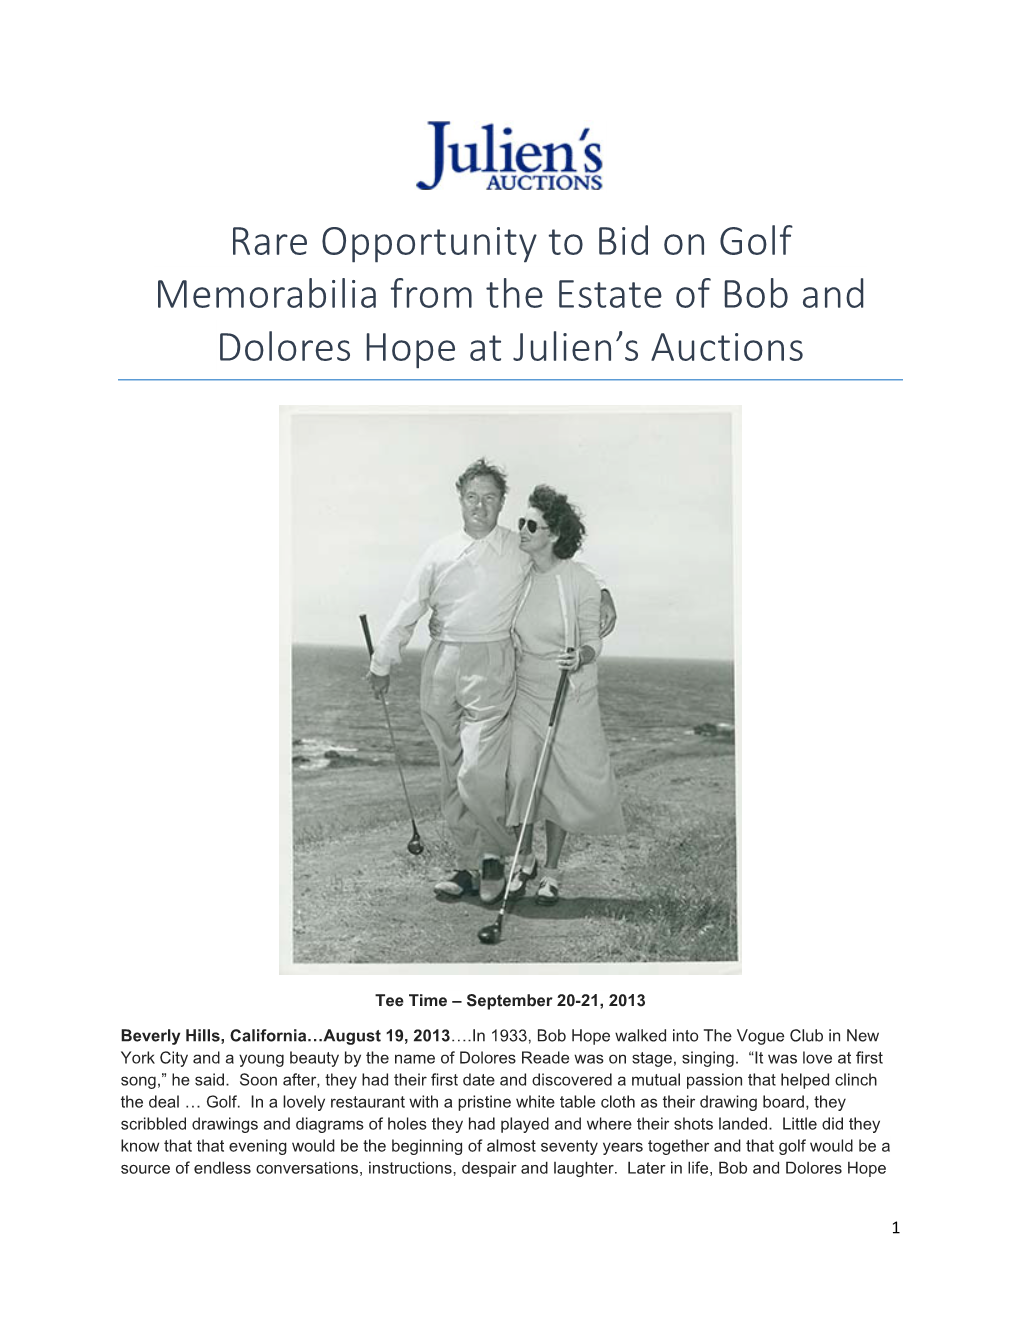 Rare Opportunity to Bid on Golf Memorabilia from the Estate of Bob and Dolores Hope at Julien’S Auctions